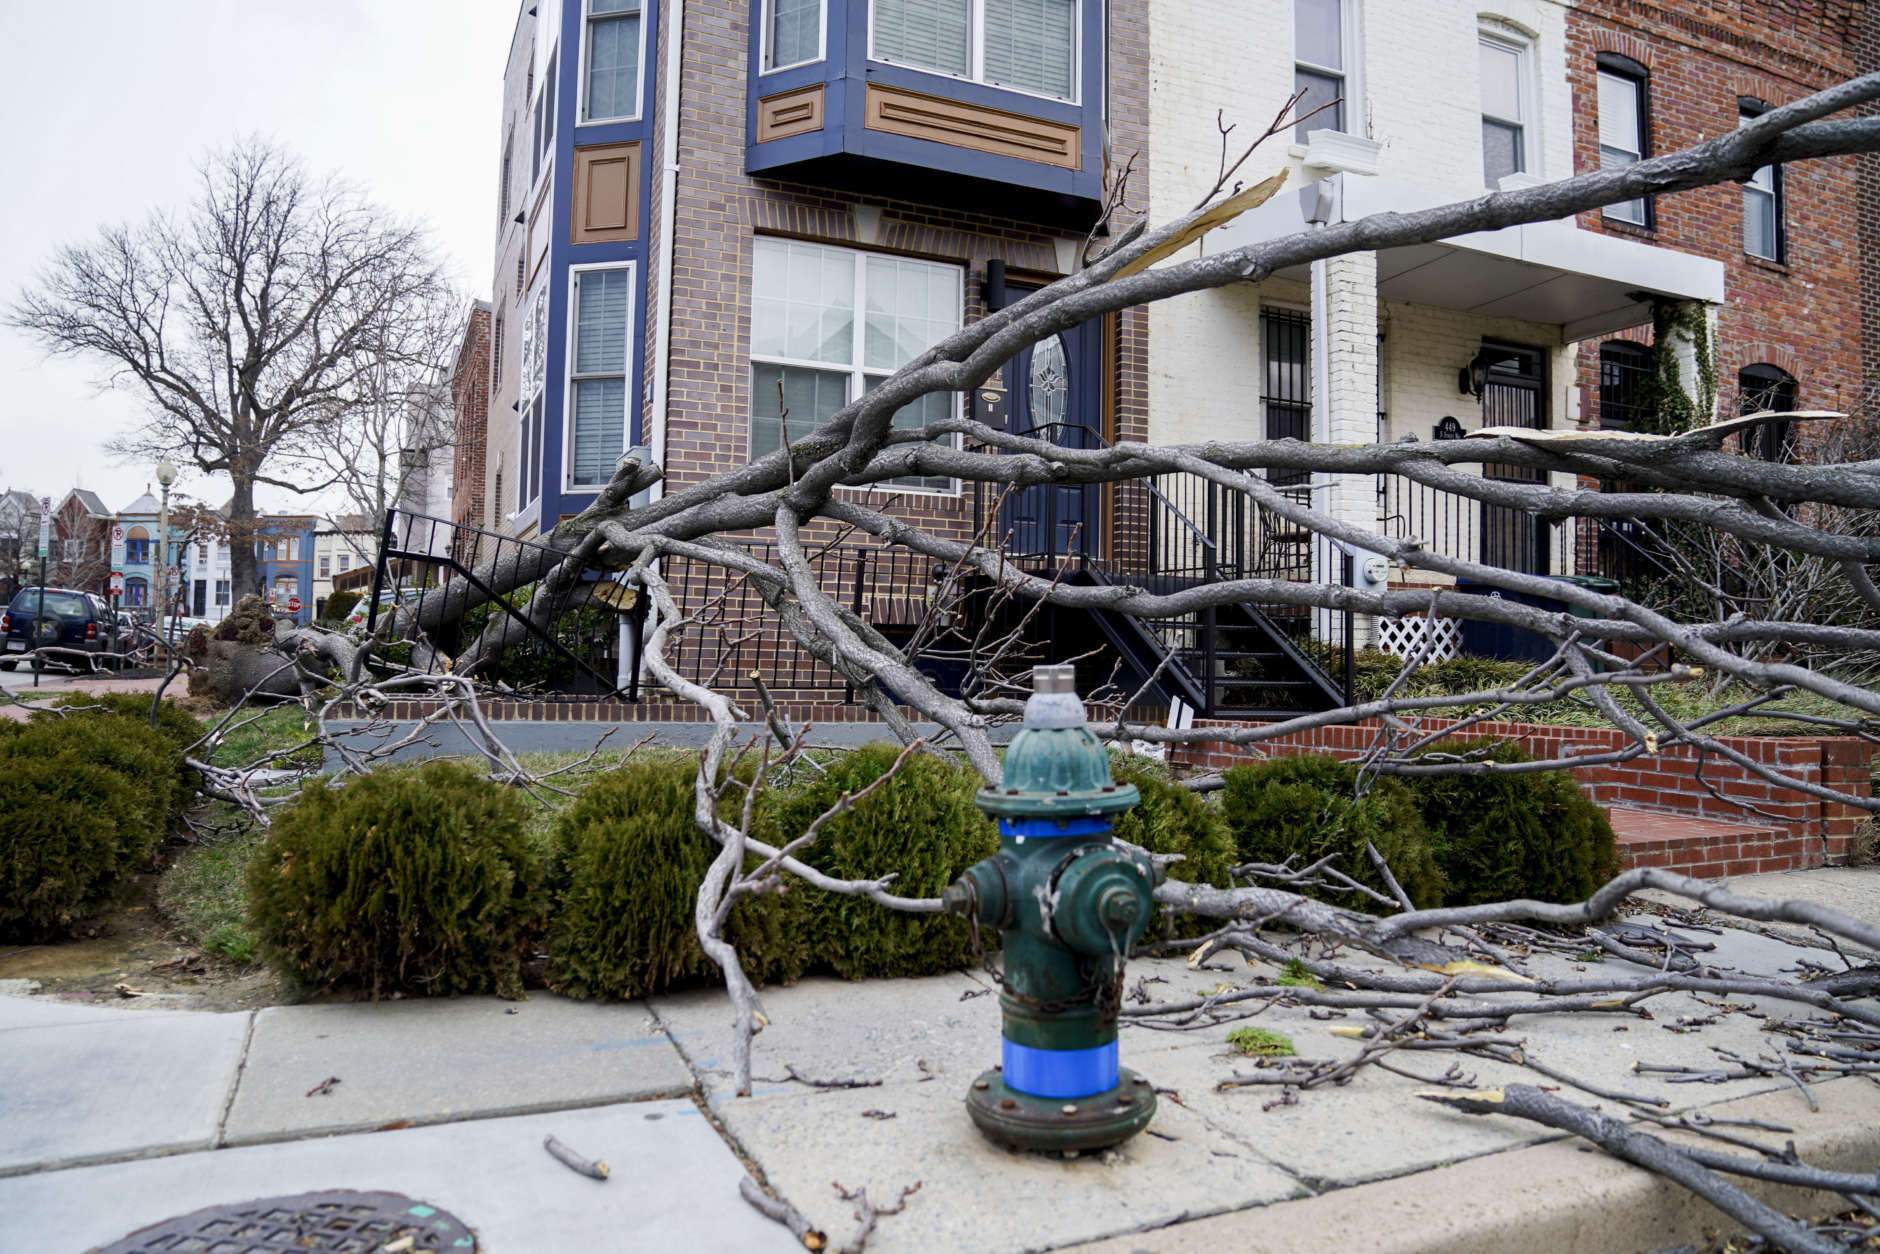 A tree is blown over as the region experiences high winds, Friday, March 2, 2018 in Washington. (AP Photo/Andrew Harnik)